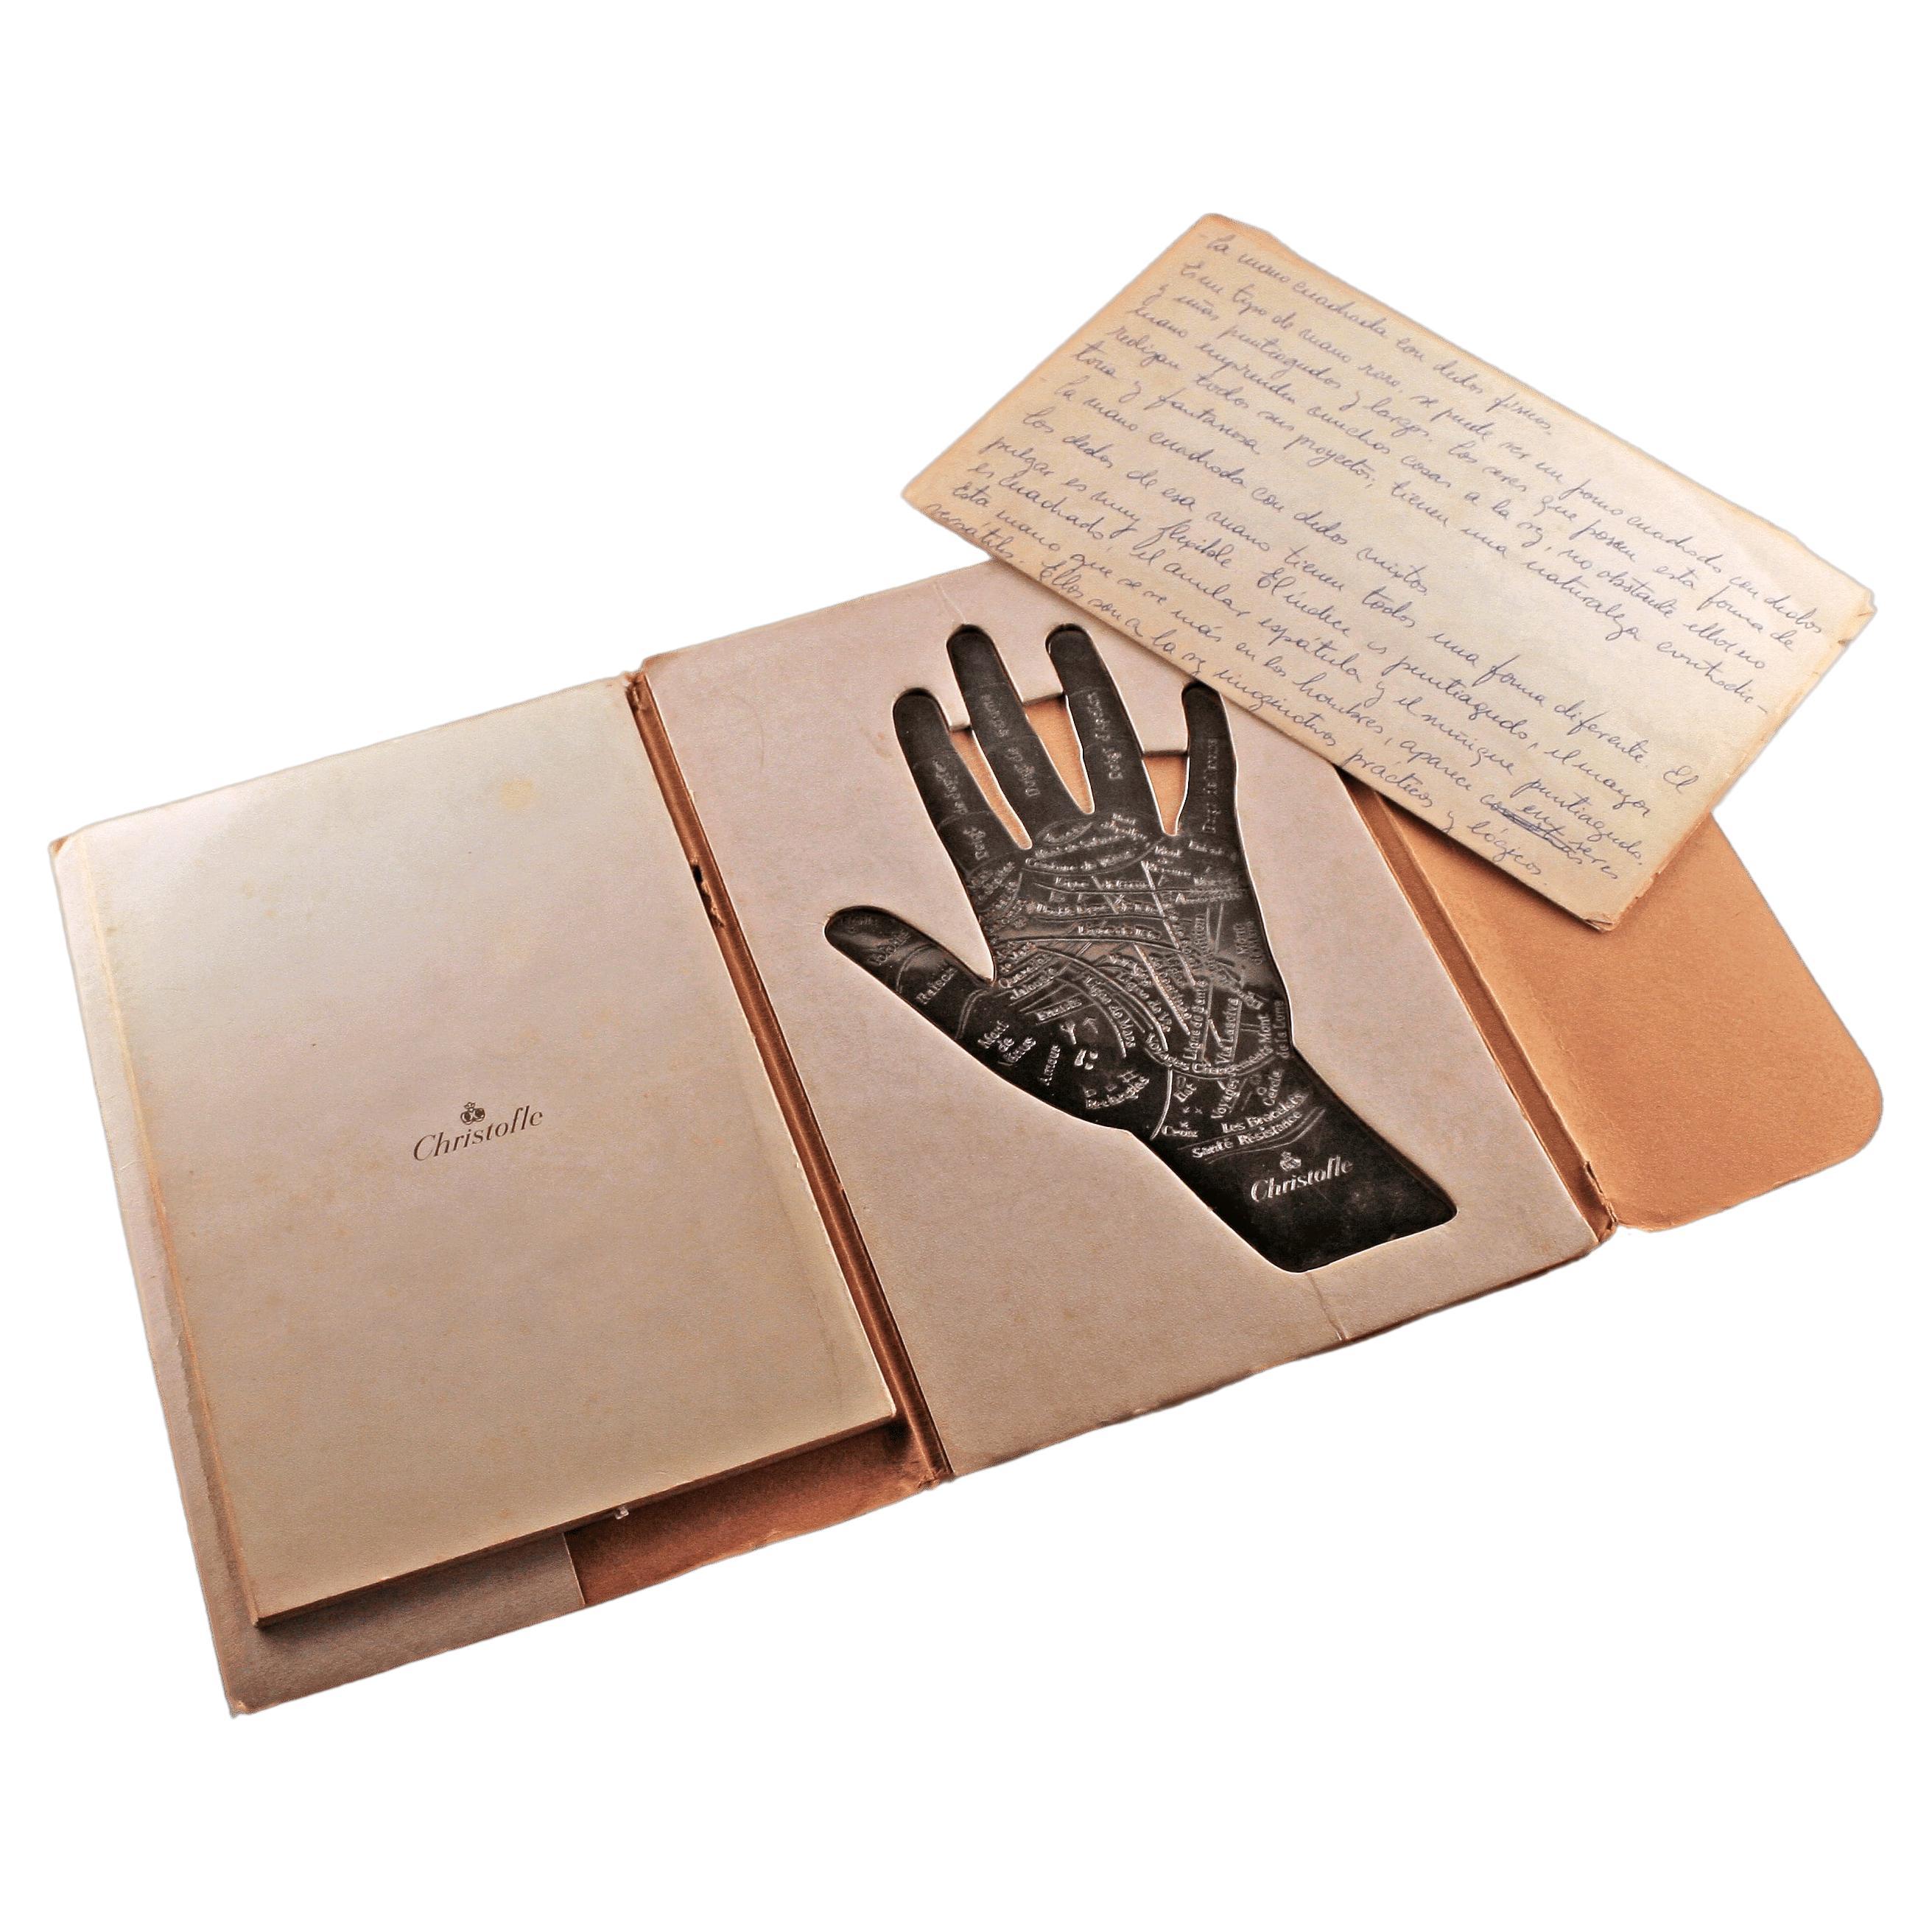 Christofle's 'The Hand of Destiny': Silver Palm Reading Paperweight and Booklet